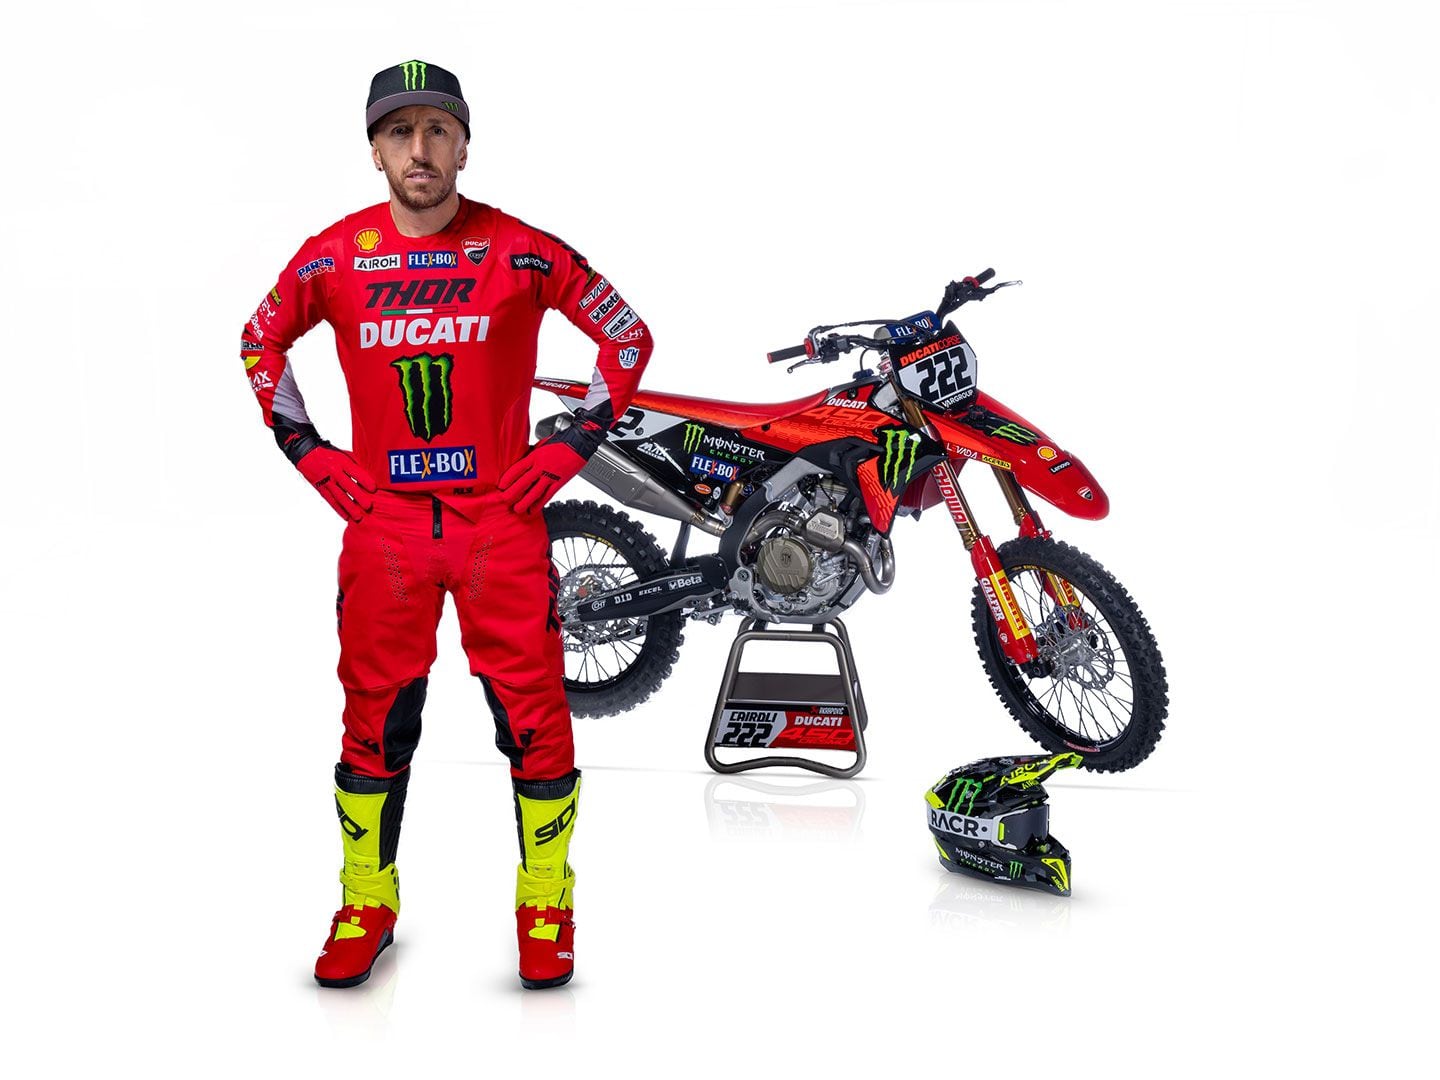 A nine-time MX champ, Cairoli is taking on a new challenge with Ducati Corse and the Desmo450 MX.